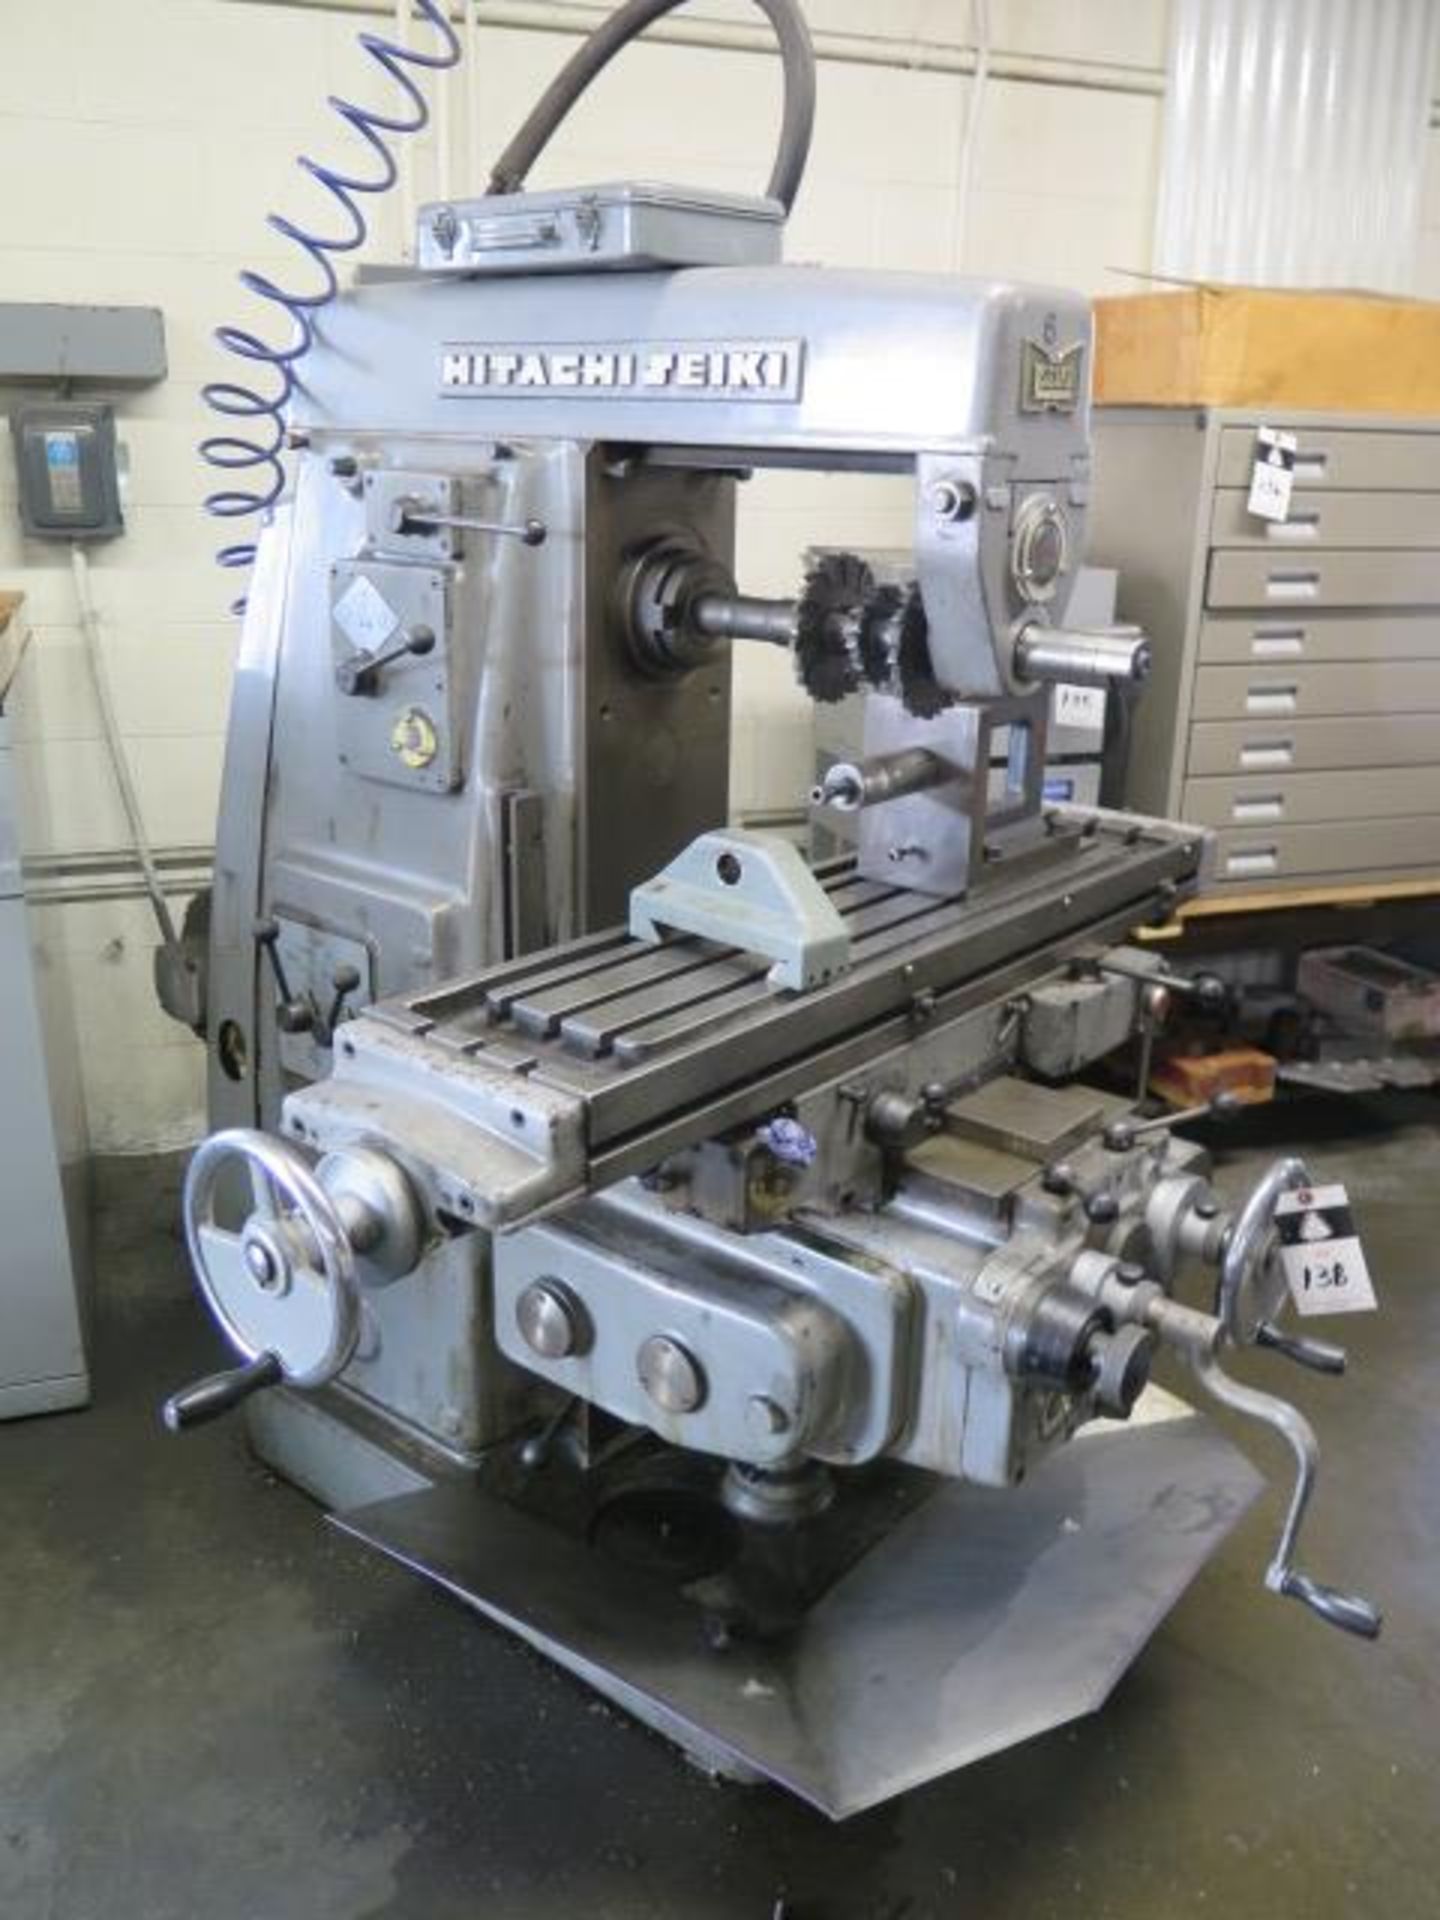 Hitachi Seiki MS-P Horiz Mill s/n N-5075 w/ 60-1800 RPM, 50-Taper Spindle, Power Feeds, SOLD AS IS - Image 2 of 14